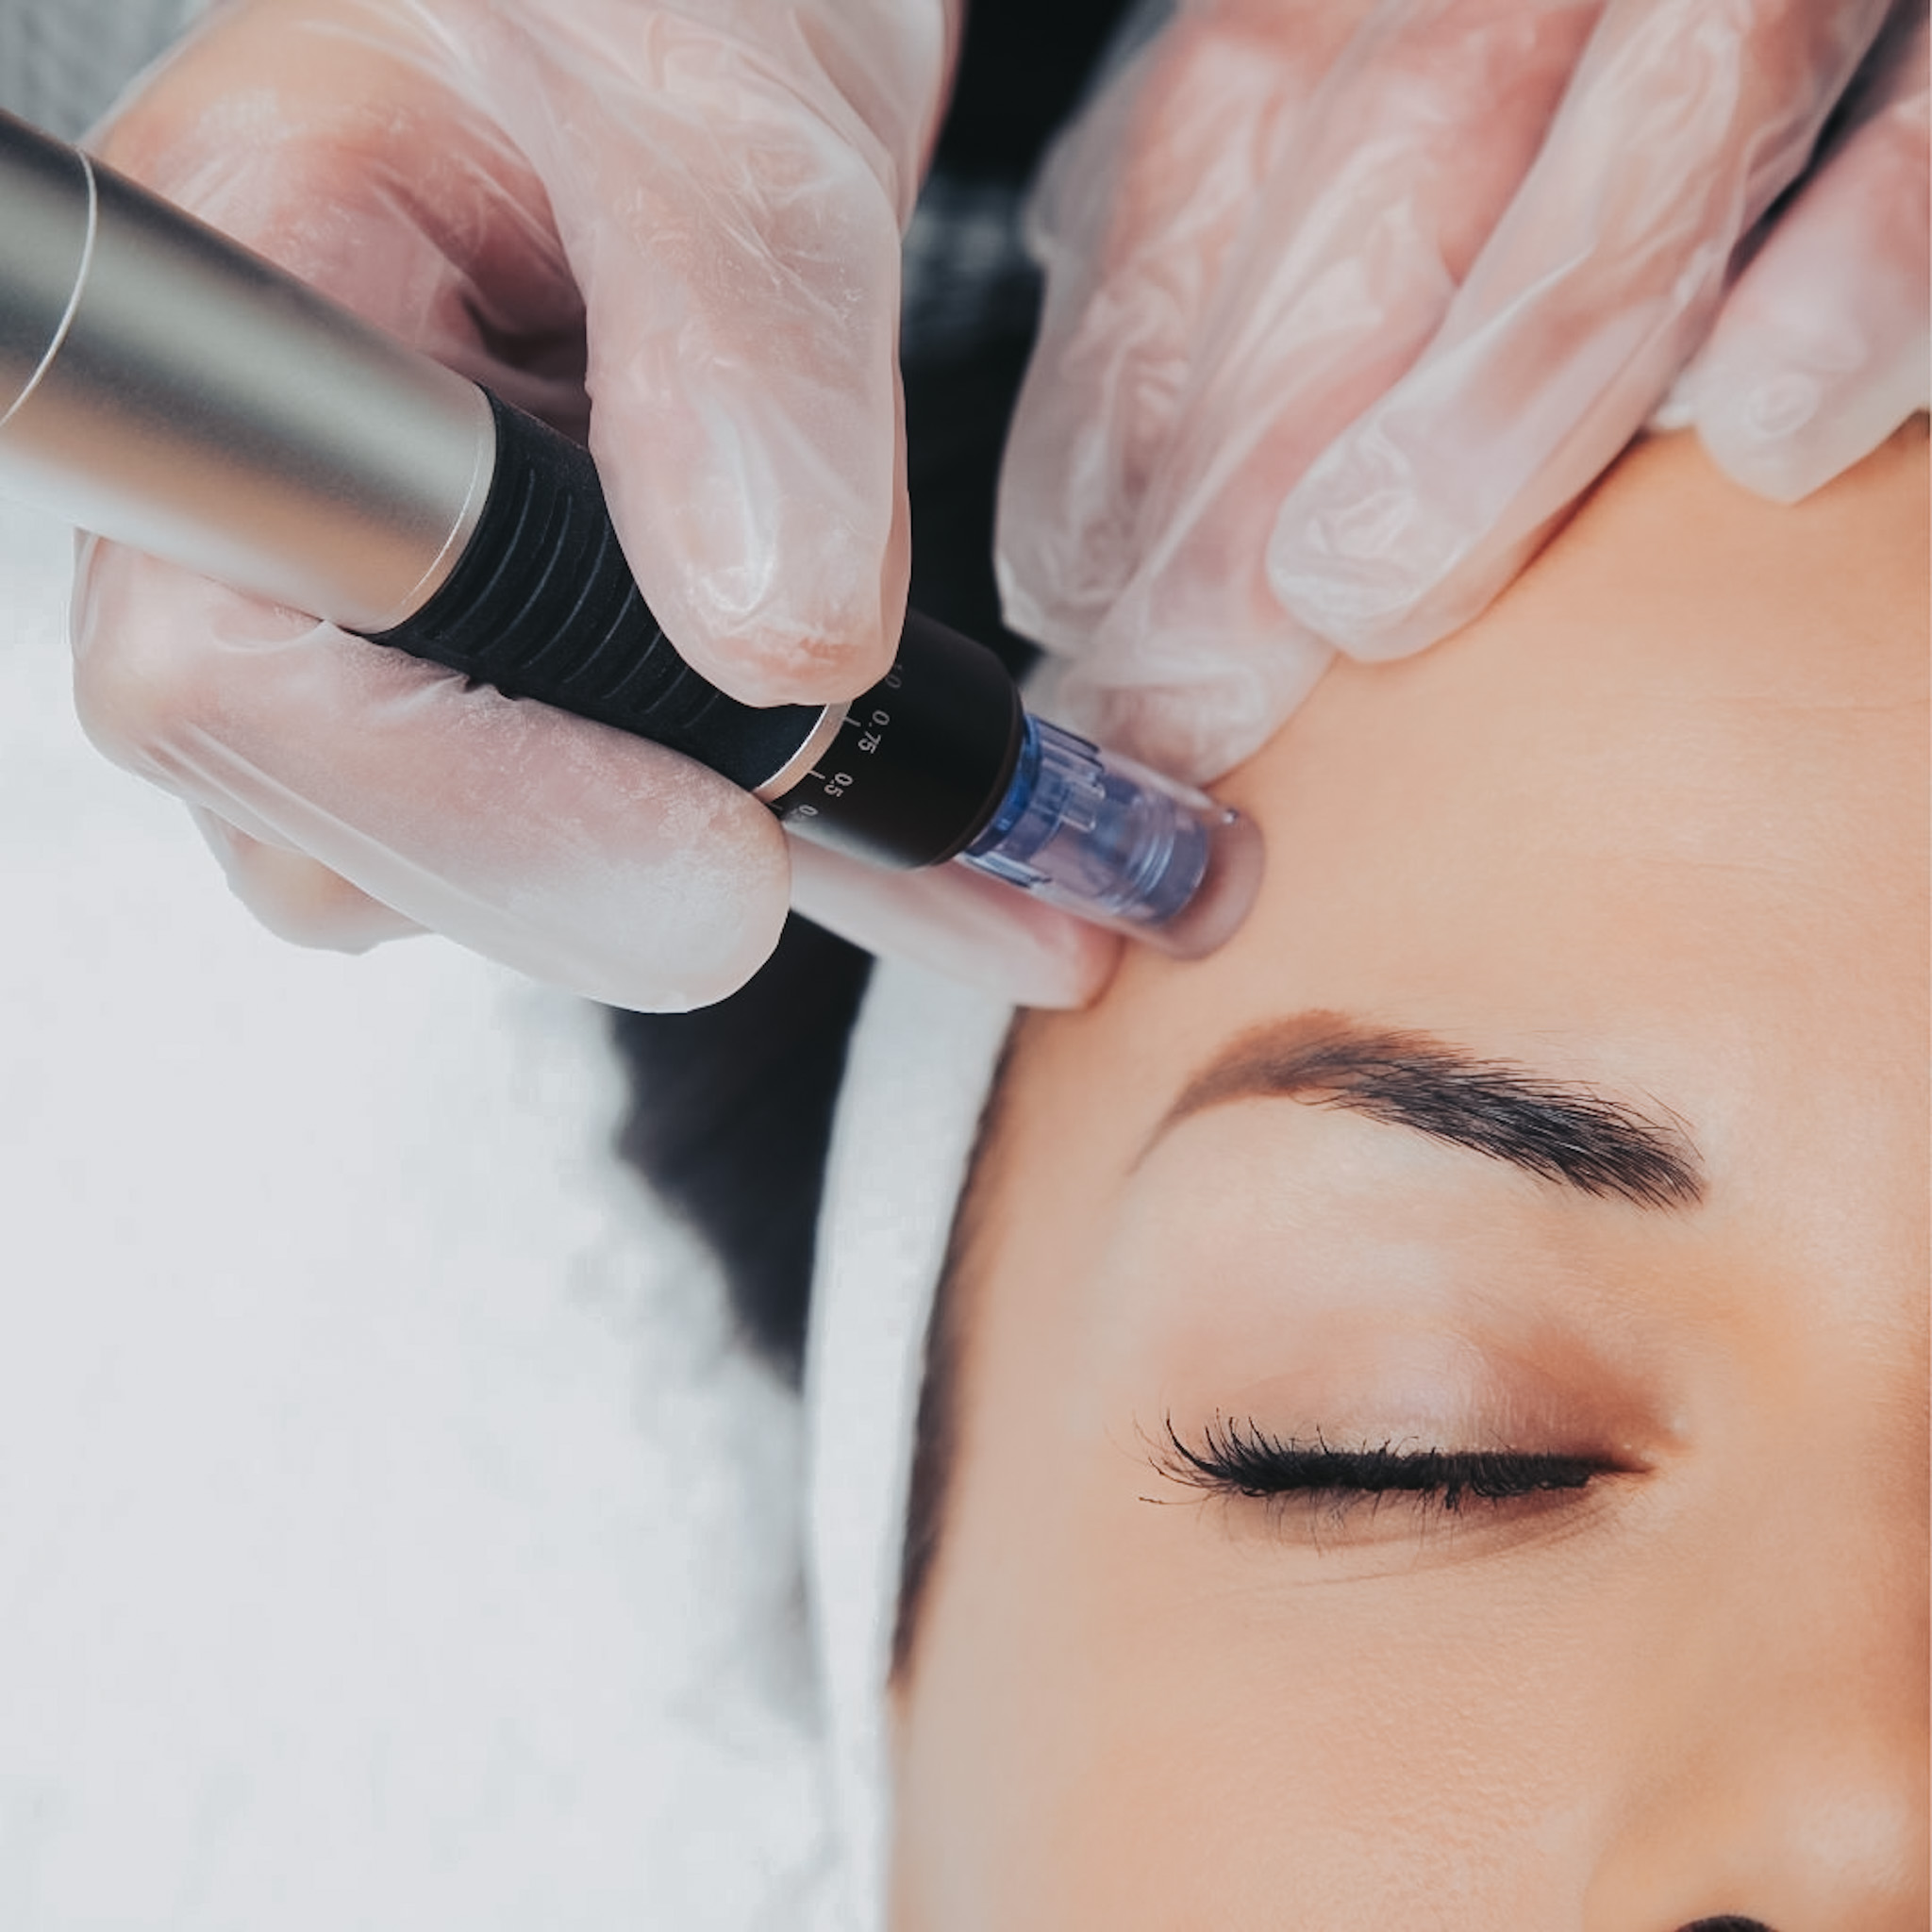 What Is Exceed Microneedling? A Beginner’s Guide